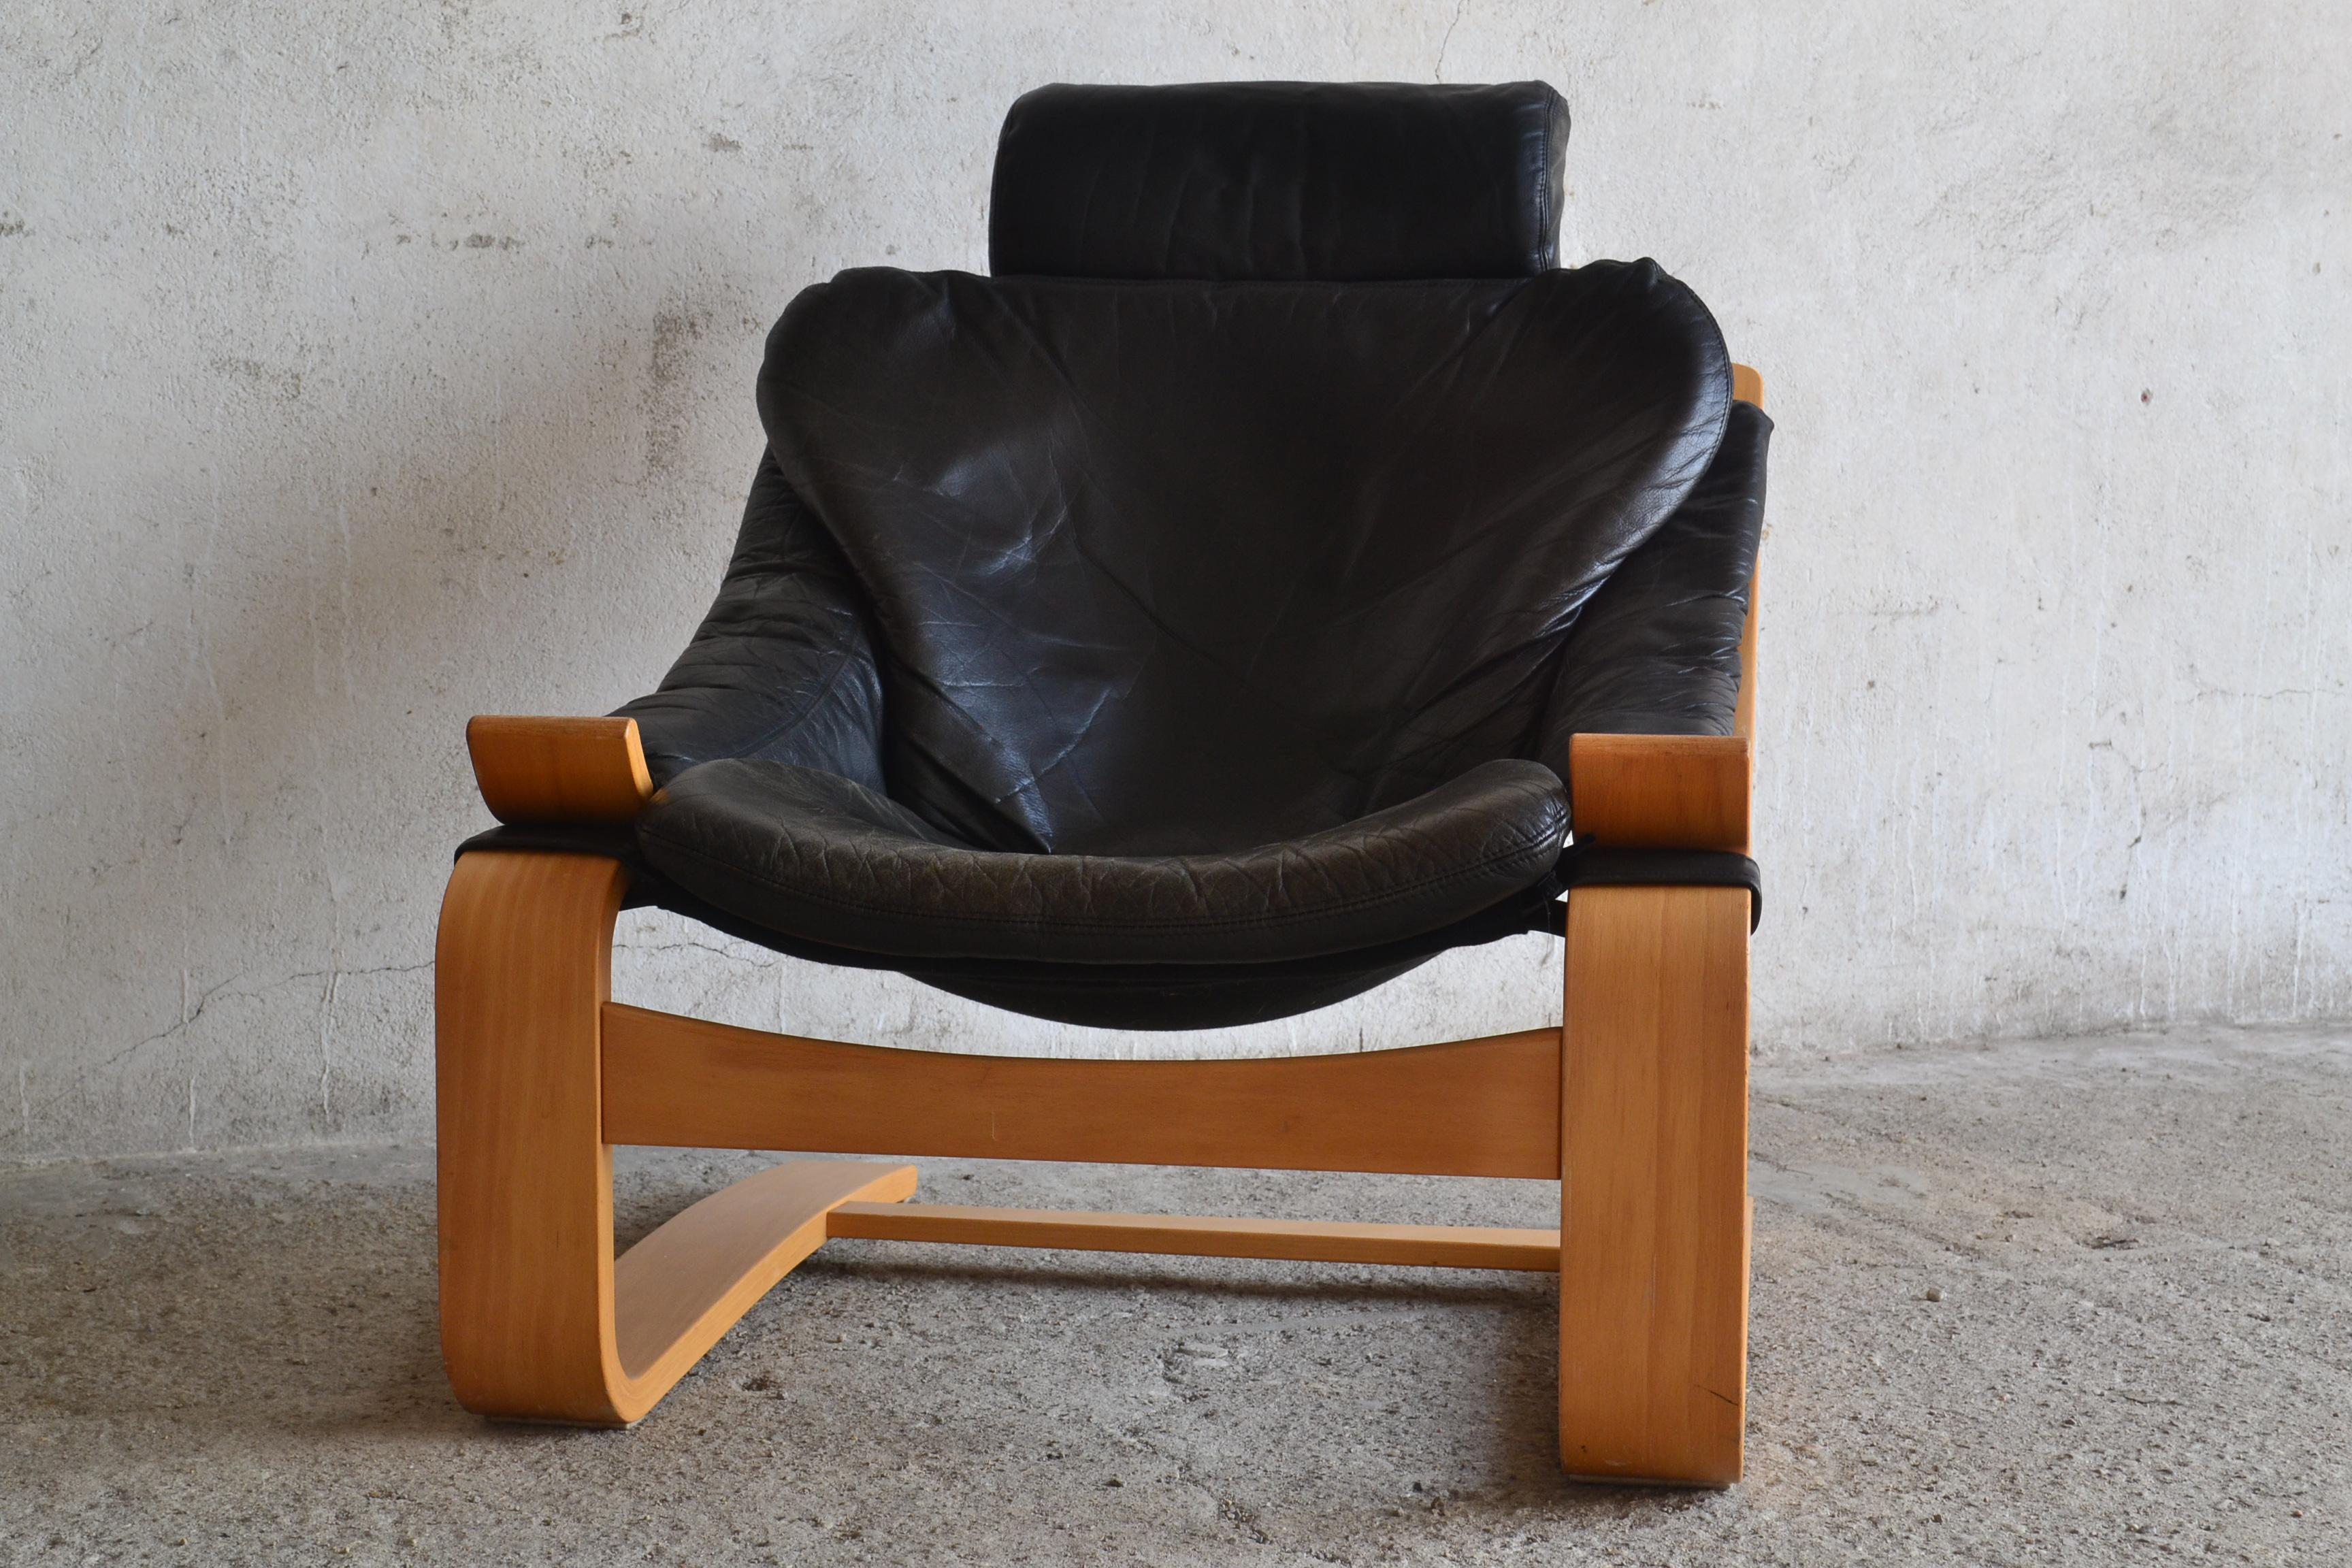 This Kroken leather armchair was designed by Ake Fribyter for Nelo in the 1970s. It is in original condition.